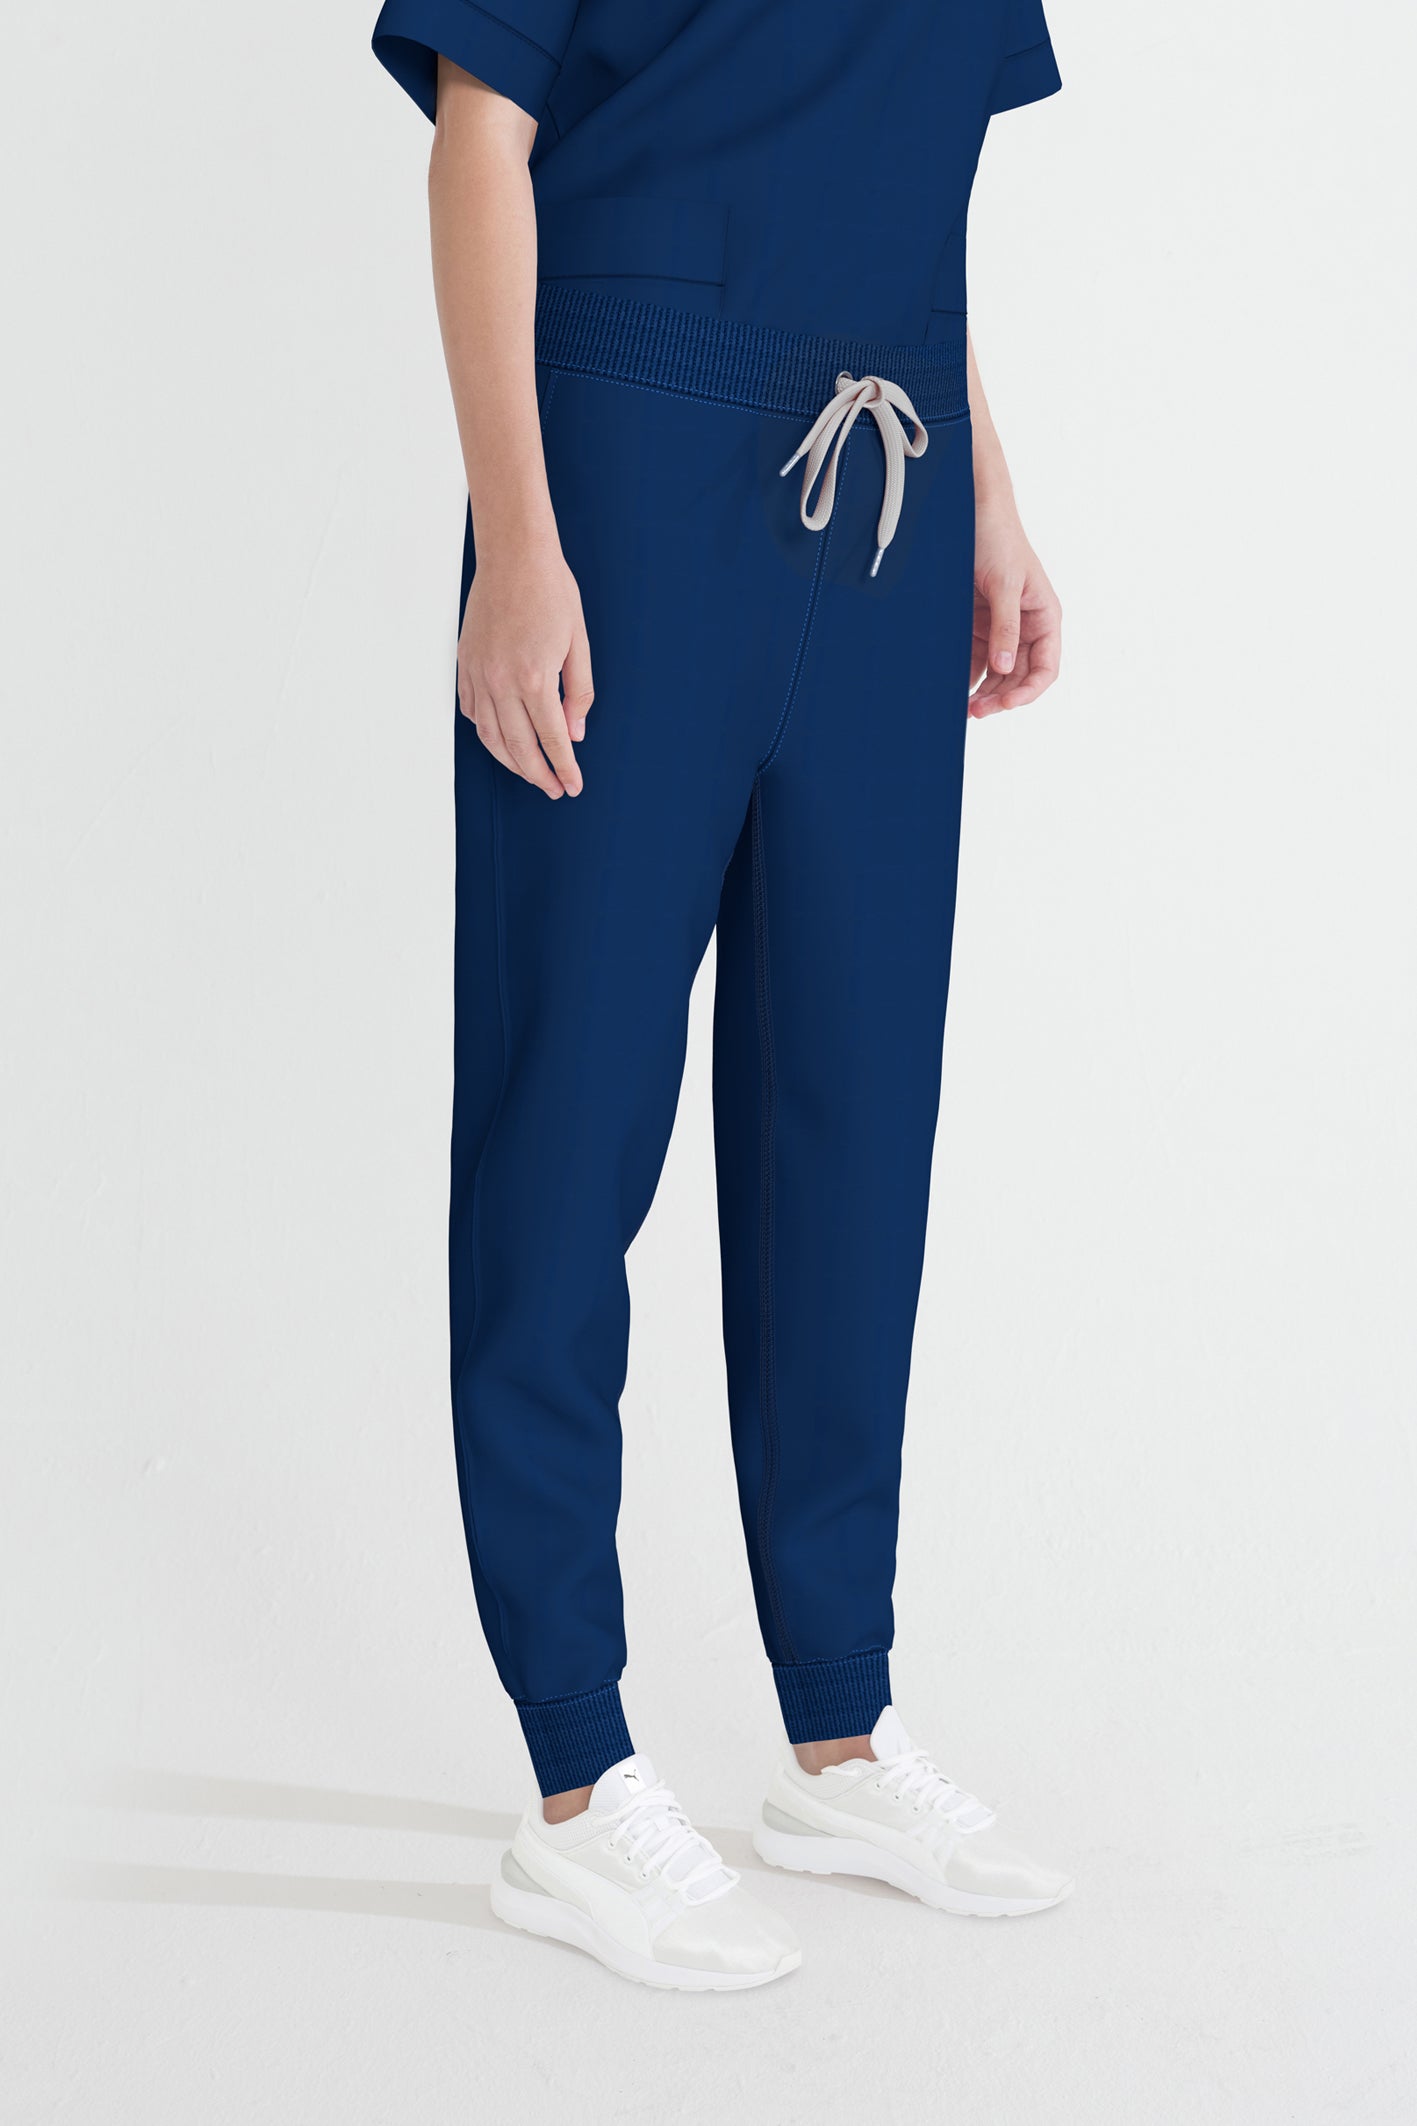 Women's BioNTex™ Jogger with Contrast String